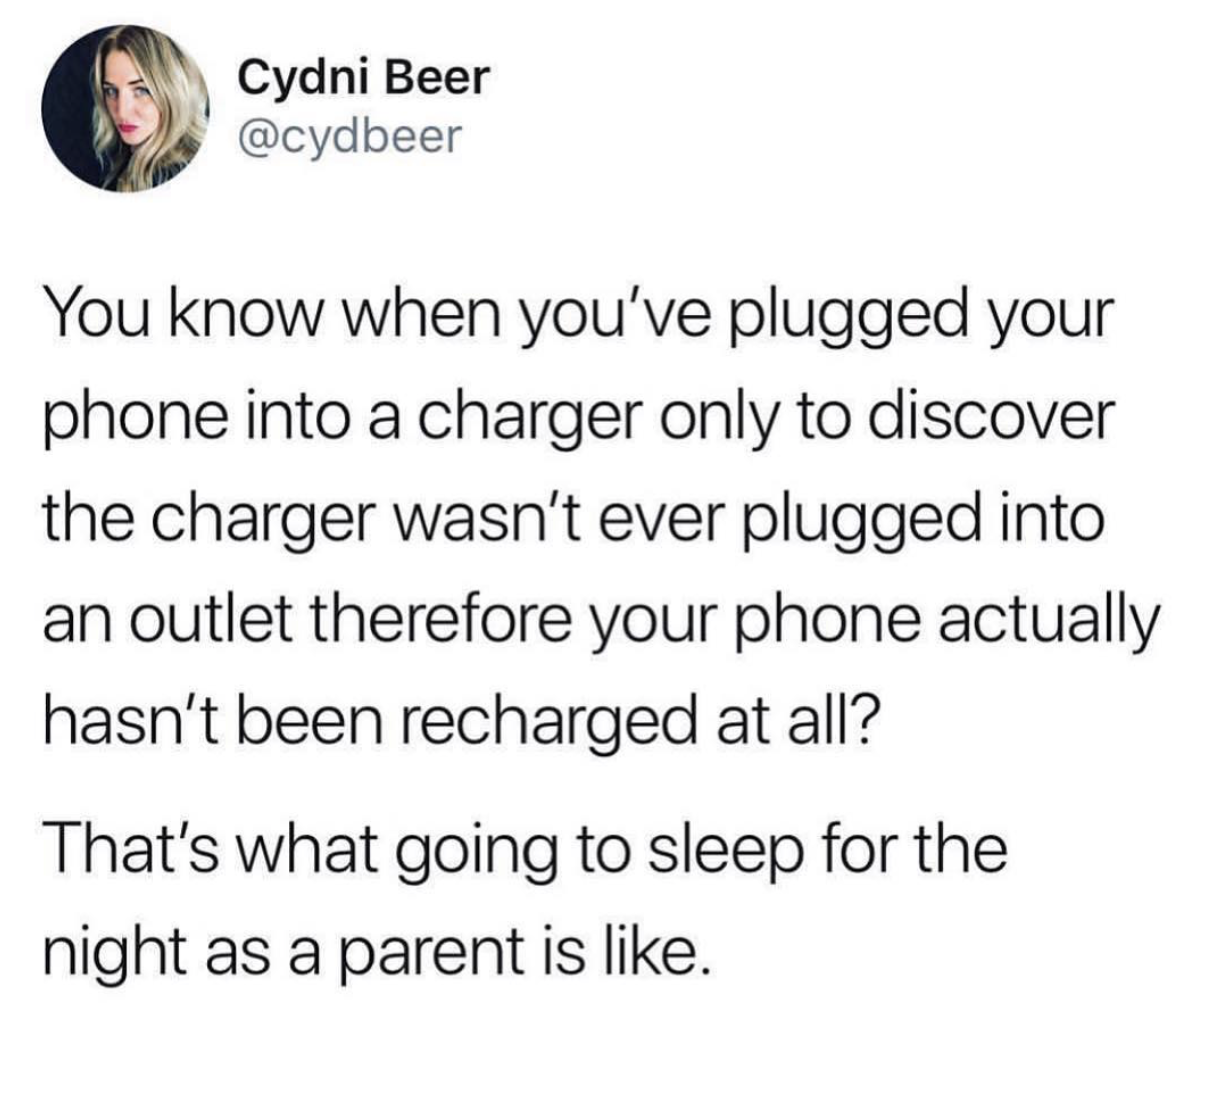 waffle house waffle home - Cydni Beer You know when you've plugged your phone into a charger only to discover the charger wasn't ever plugged into an outlet therefore your phone actually hasn't been recharged at all? That's what going to sleep for the nig